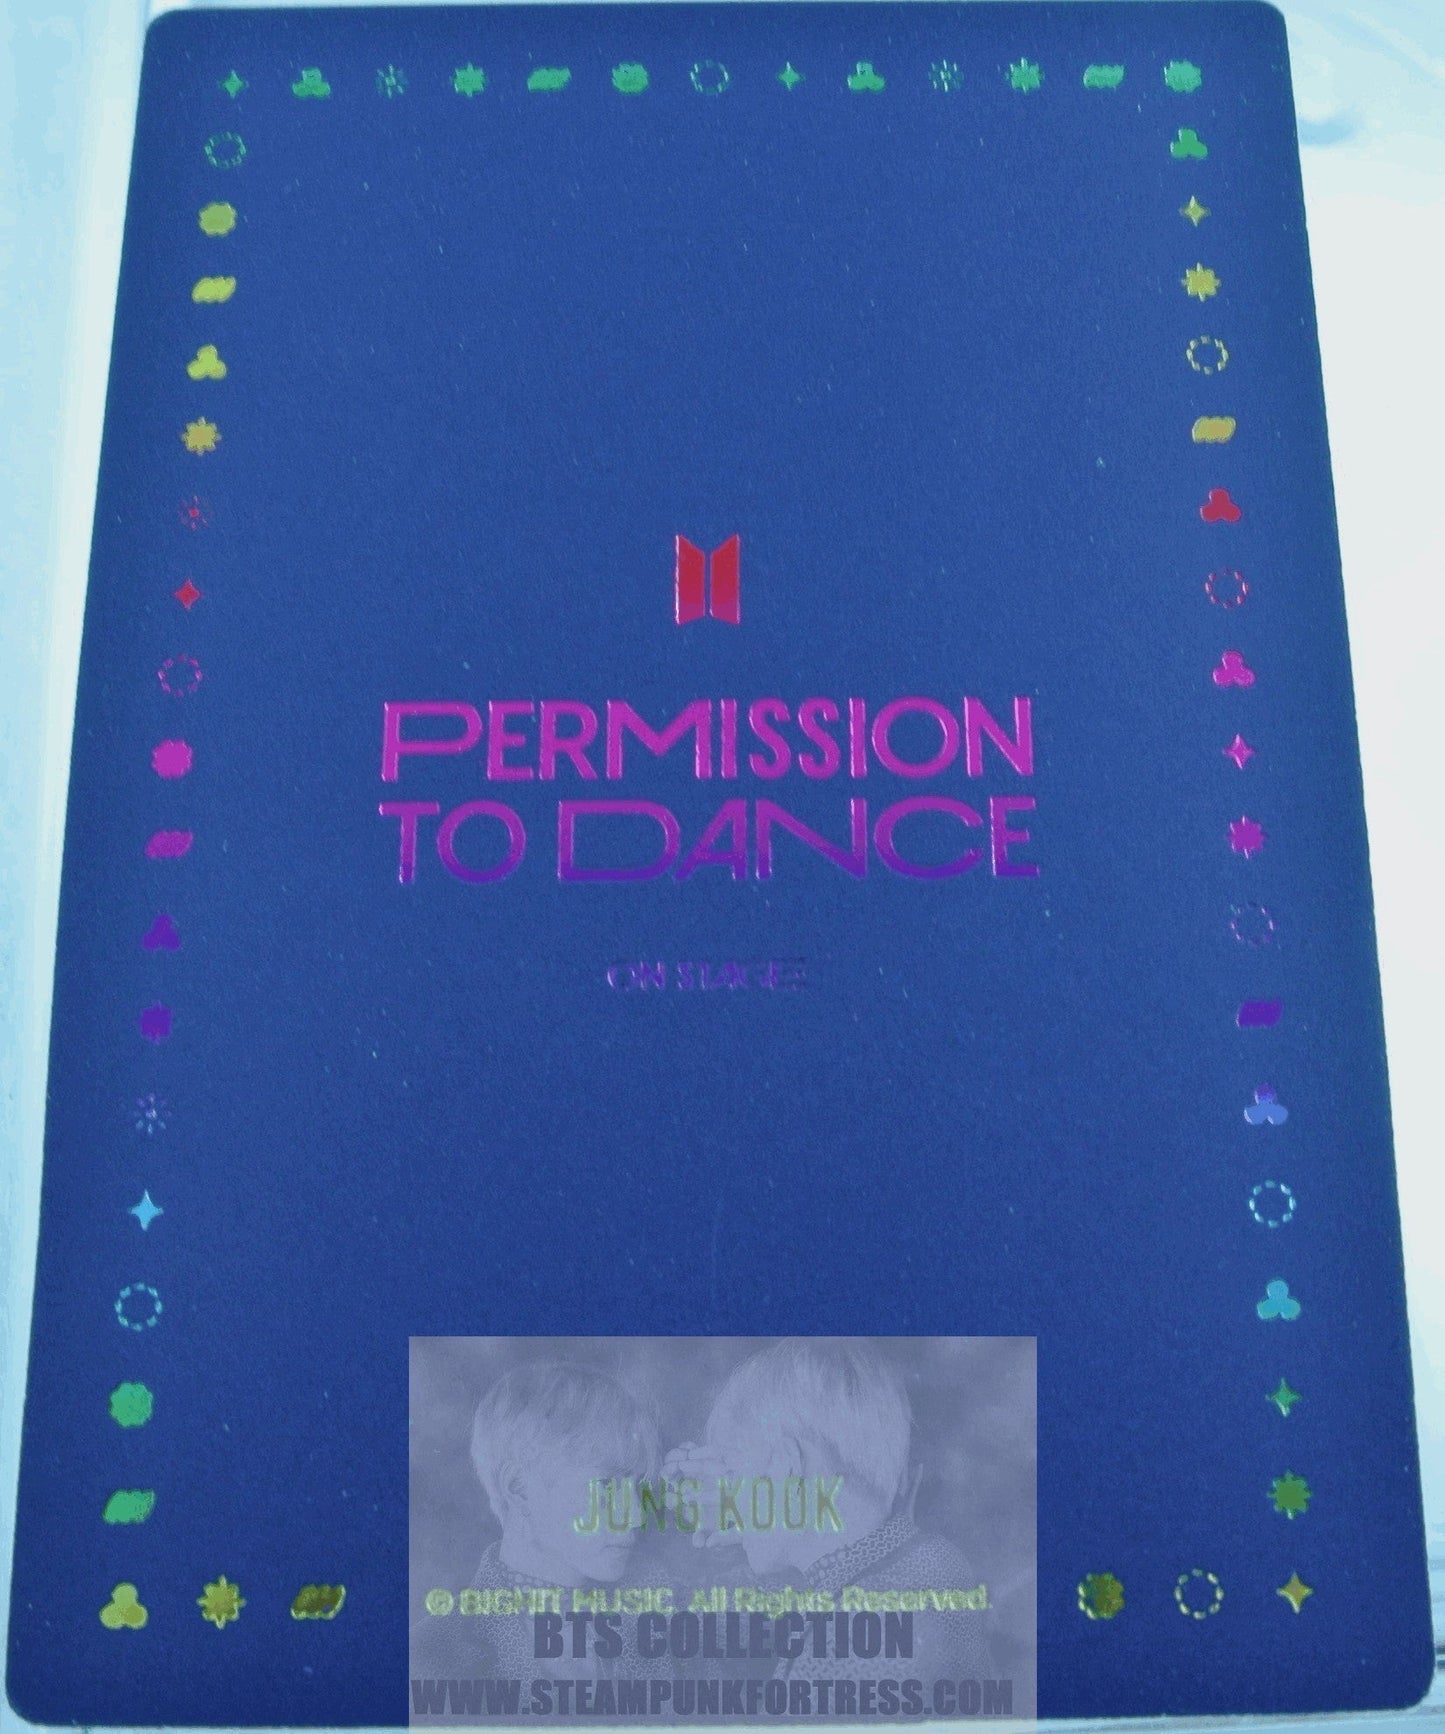 BTS JUNGKOOK JEON JUNG-KOOK PTD 2022 PERMISSION TO DANCE ON STAGE SEOUL PHOTOCARD PHOTO CARD PC SPECIAL HOLOGRAM LIMITED EDITION NEW OFFICIAL MERCHANDISE